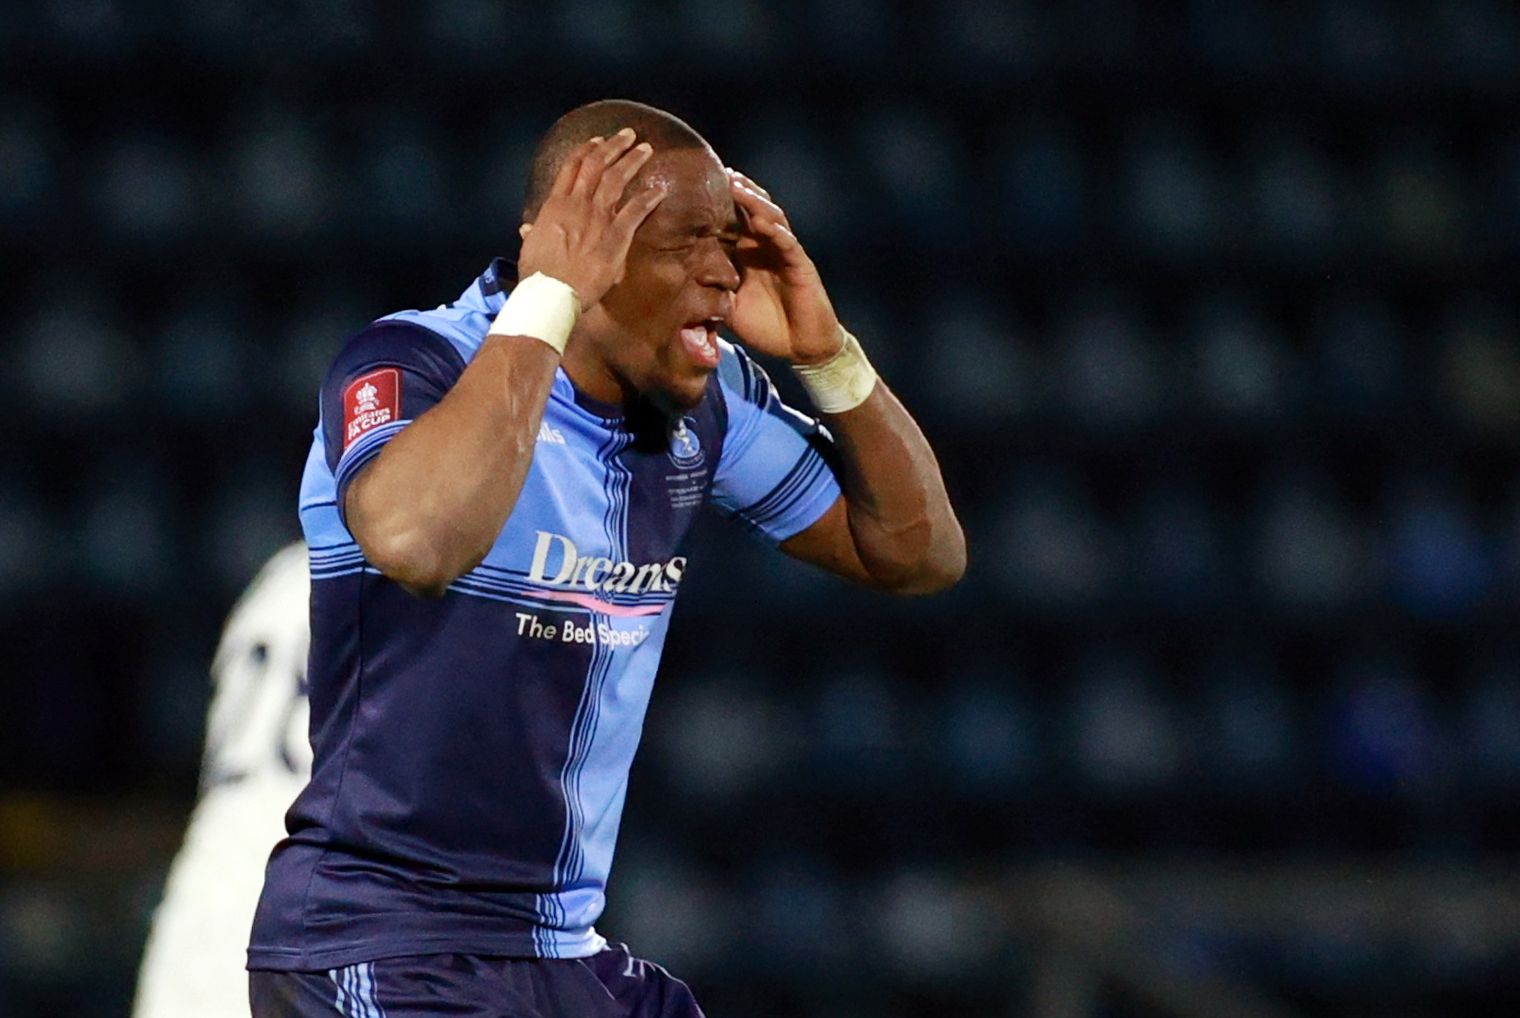 Soccer Football - FA Cup - Fourth Round - Wycombe Wanderers v Tottenham Hotspur - Adams Park, High Wycombe, Britain - January 25, 2021 Wycombe Wanderers' Uche Ikpeazu reacts REUTERS/Hannah Mckay